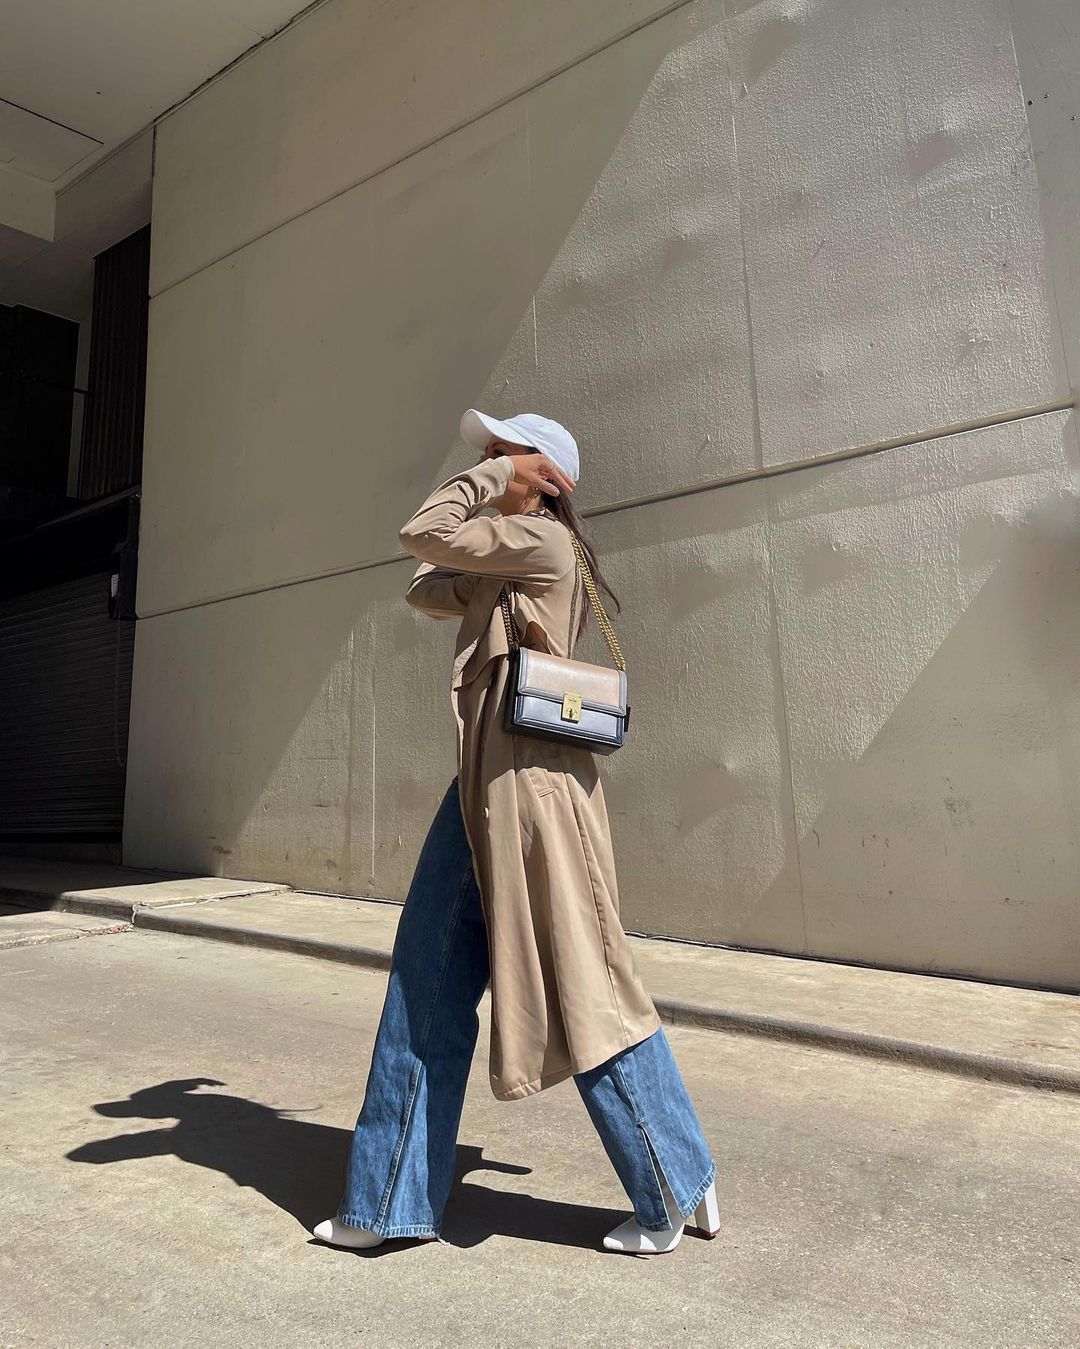 Classic Spring Outfits: @kaytiemo wears a trench coat and jeans